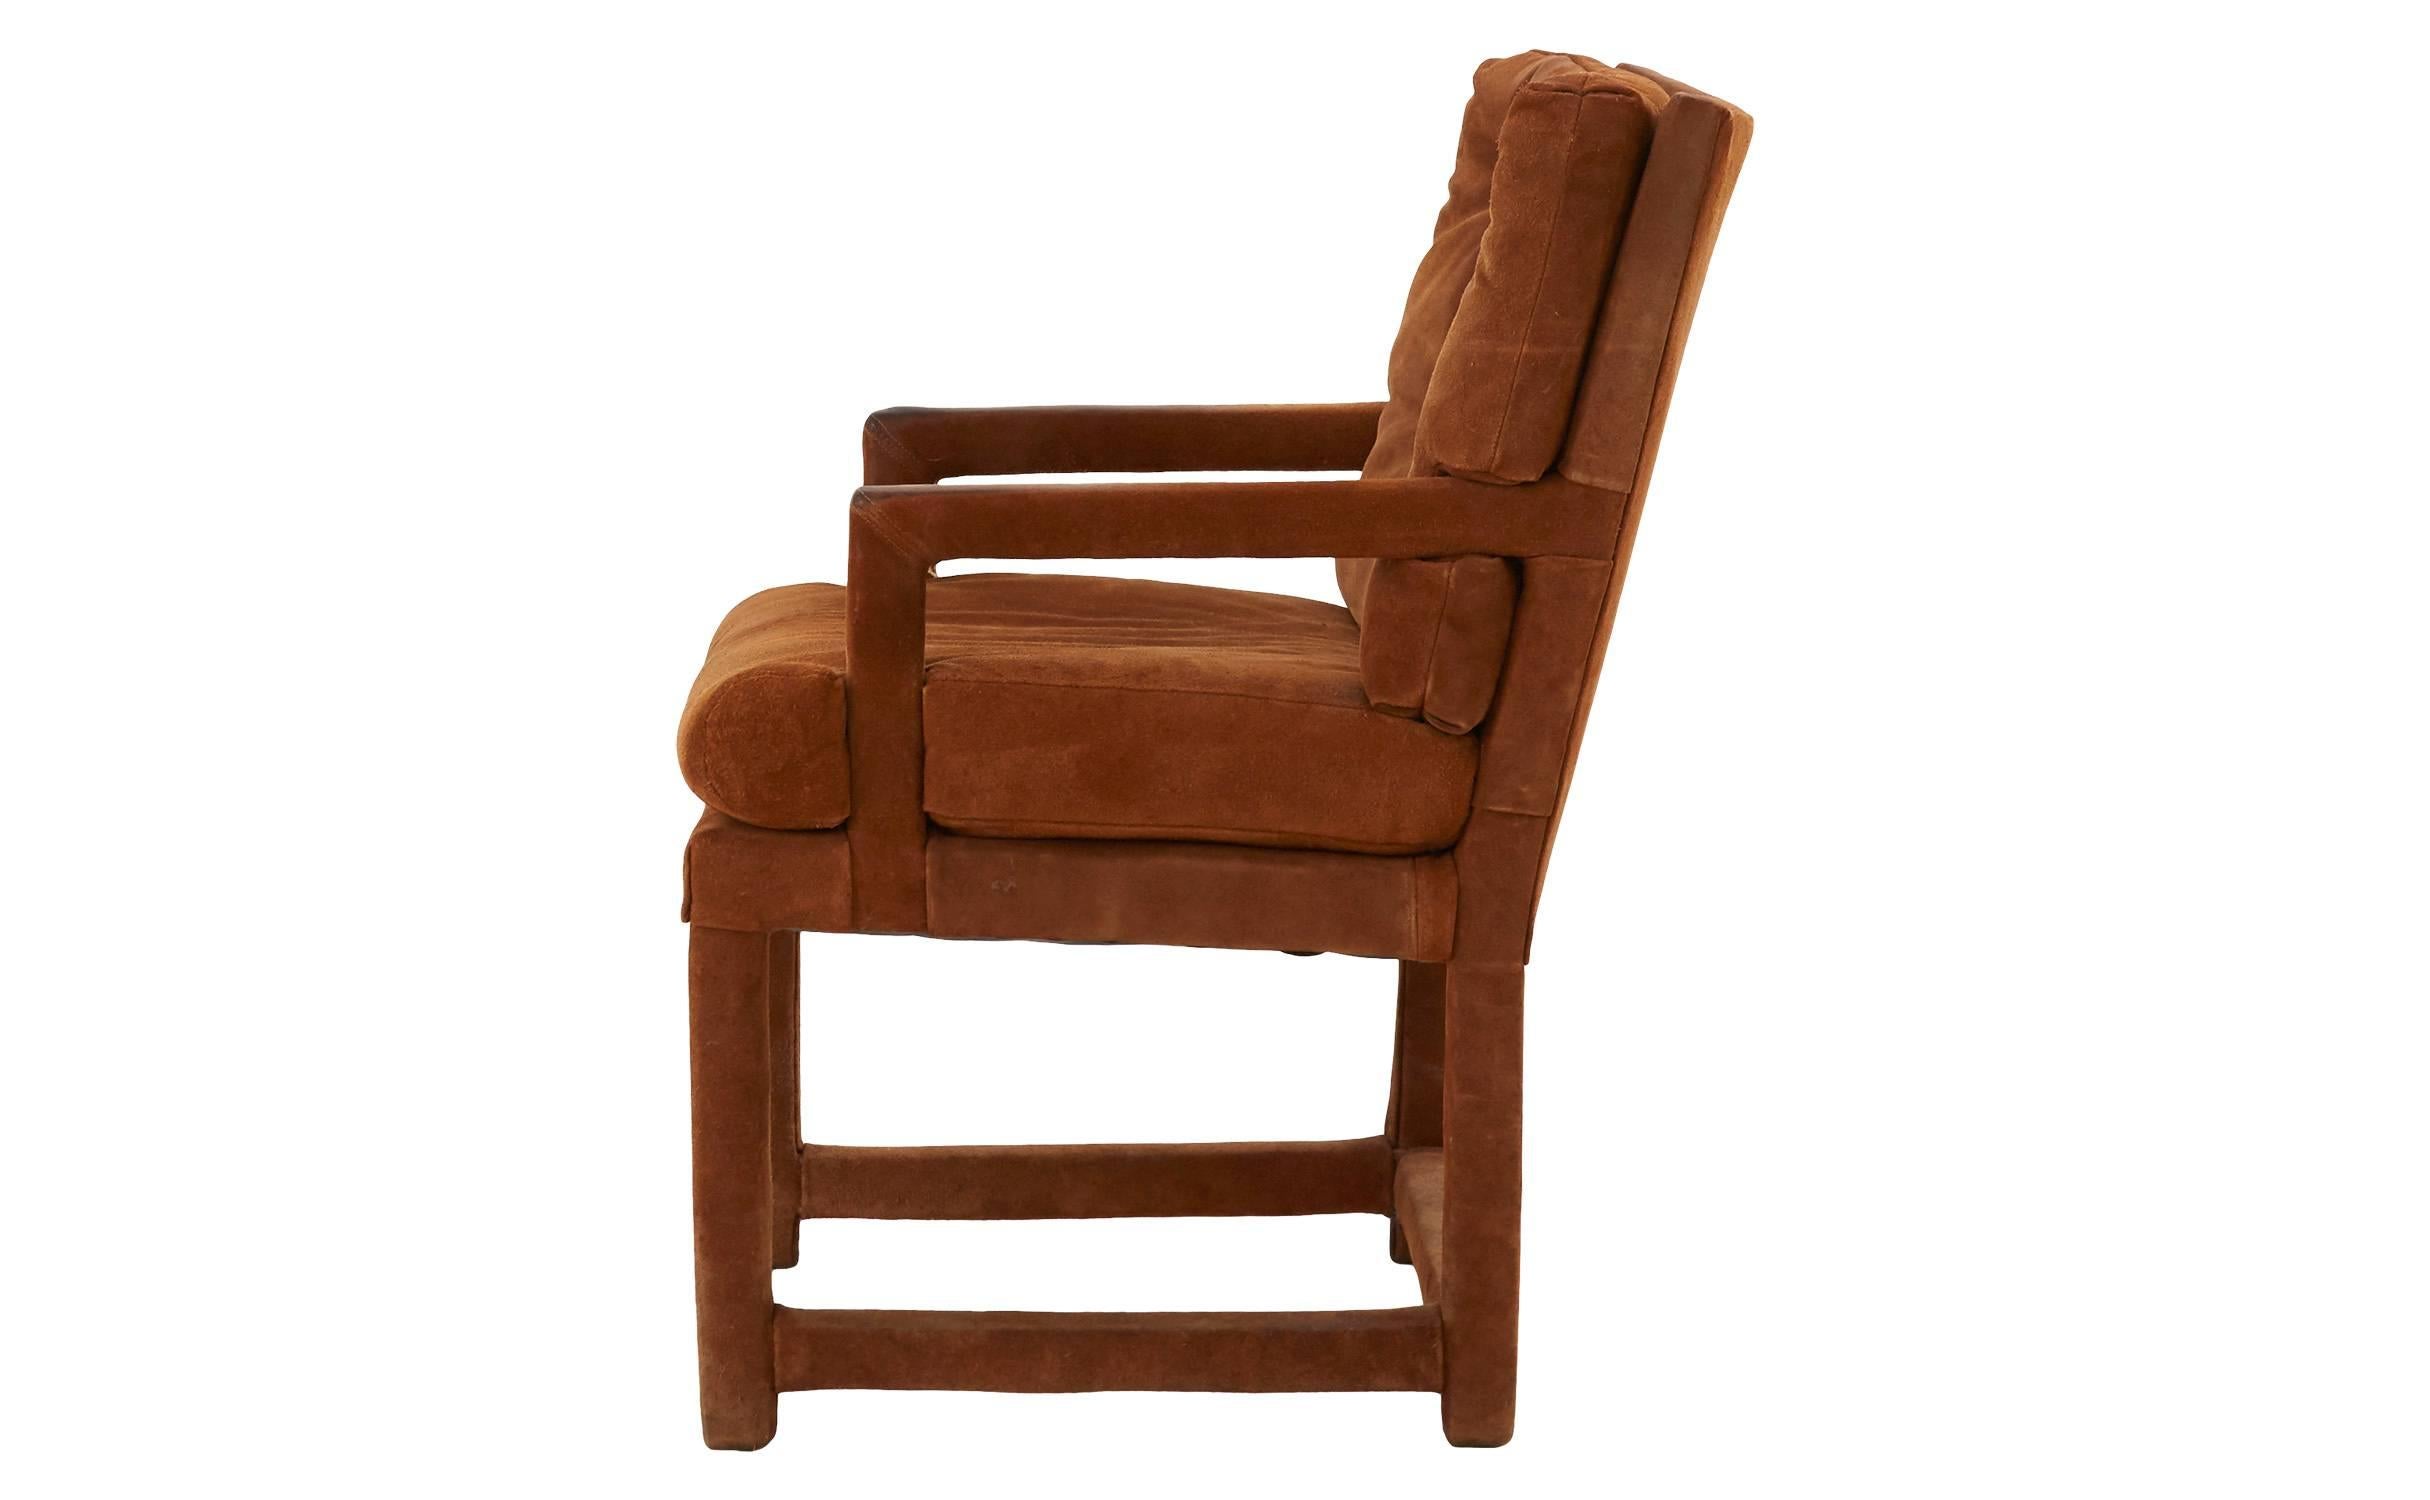 American Brown Suede Chairs